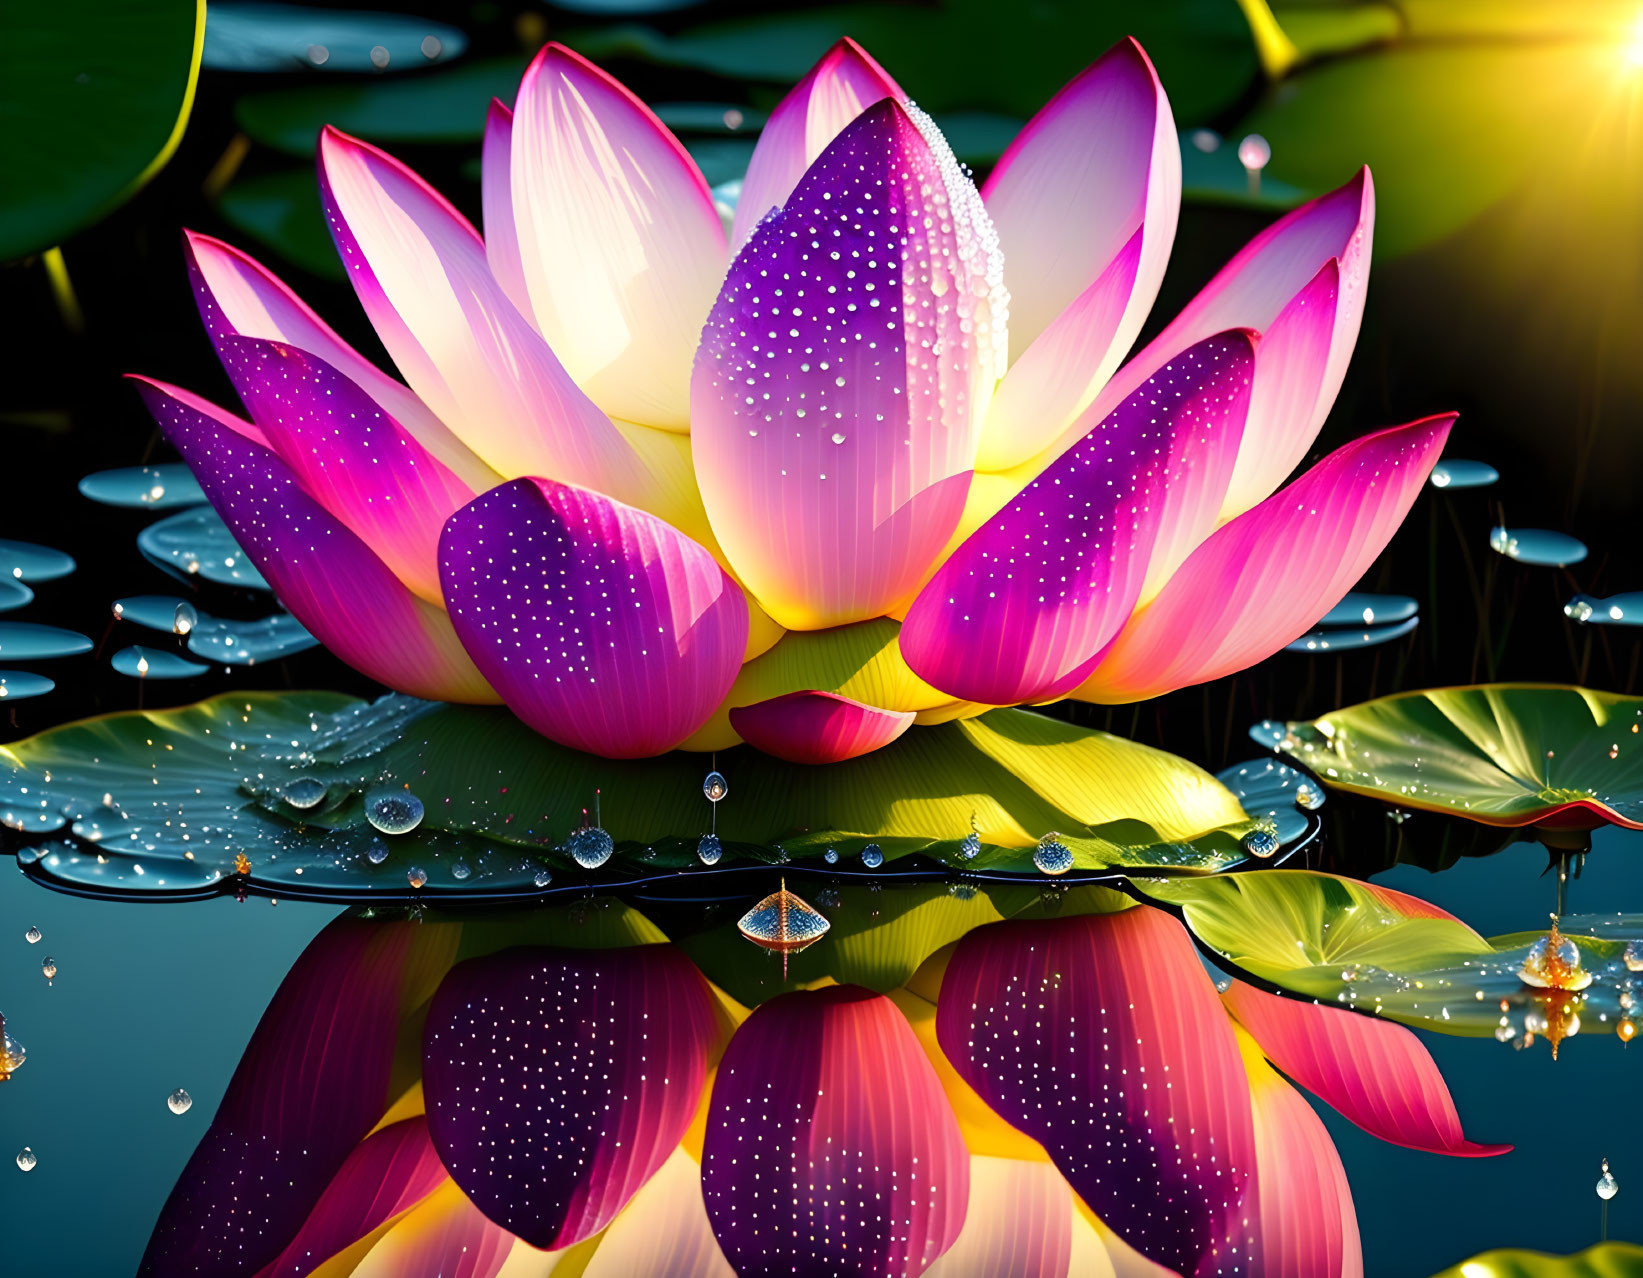 Vibrant digital artwork: Pink and white lotus flower with water droplets, reflected in serene